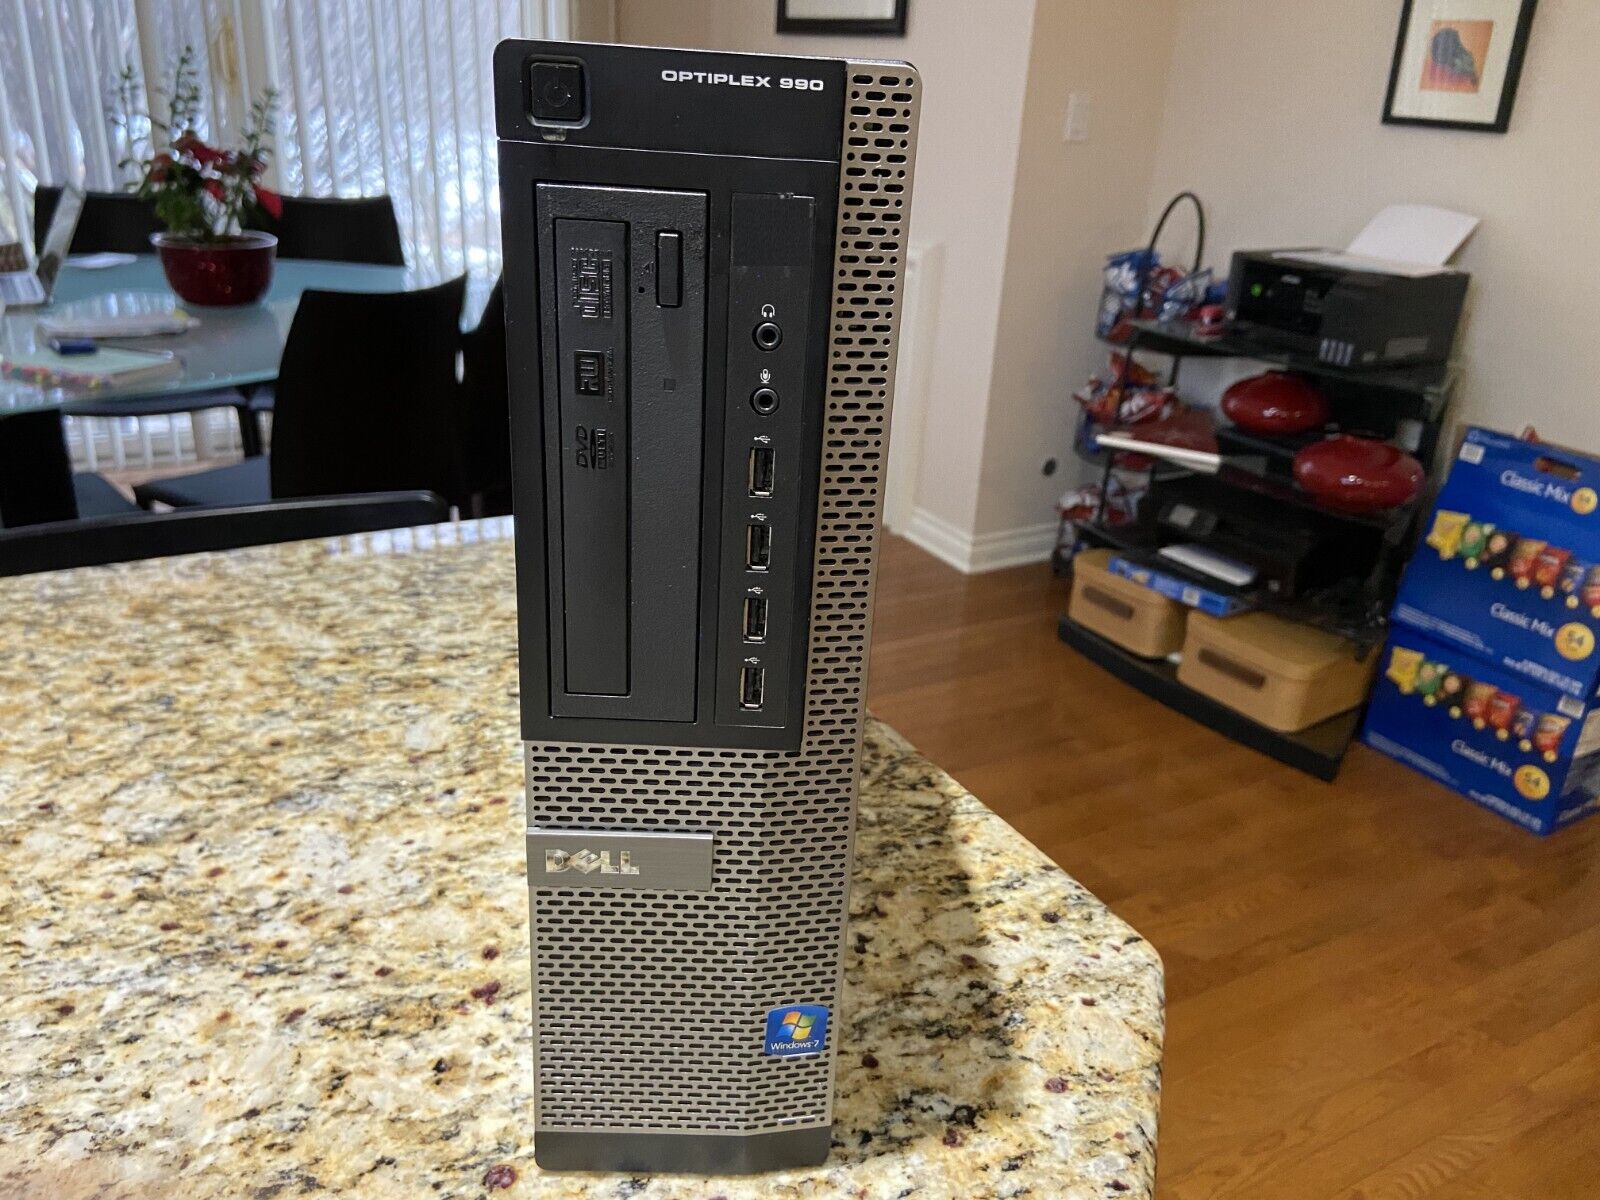 Dell Optiplex 990 DT i7-2600 3.4GHZ 8GB RAM 256GB SSD Win 10 Pro Activated